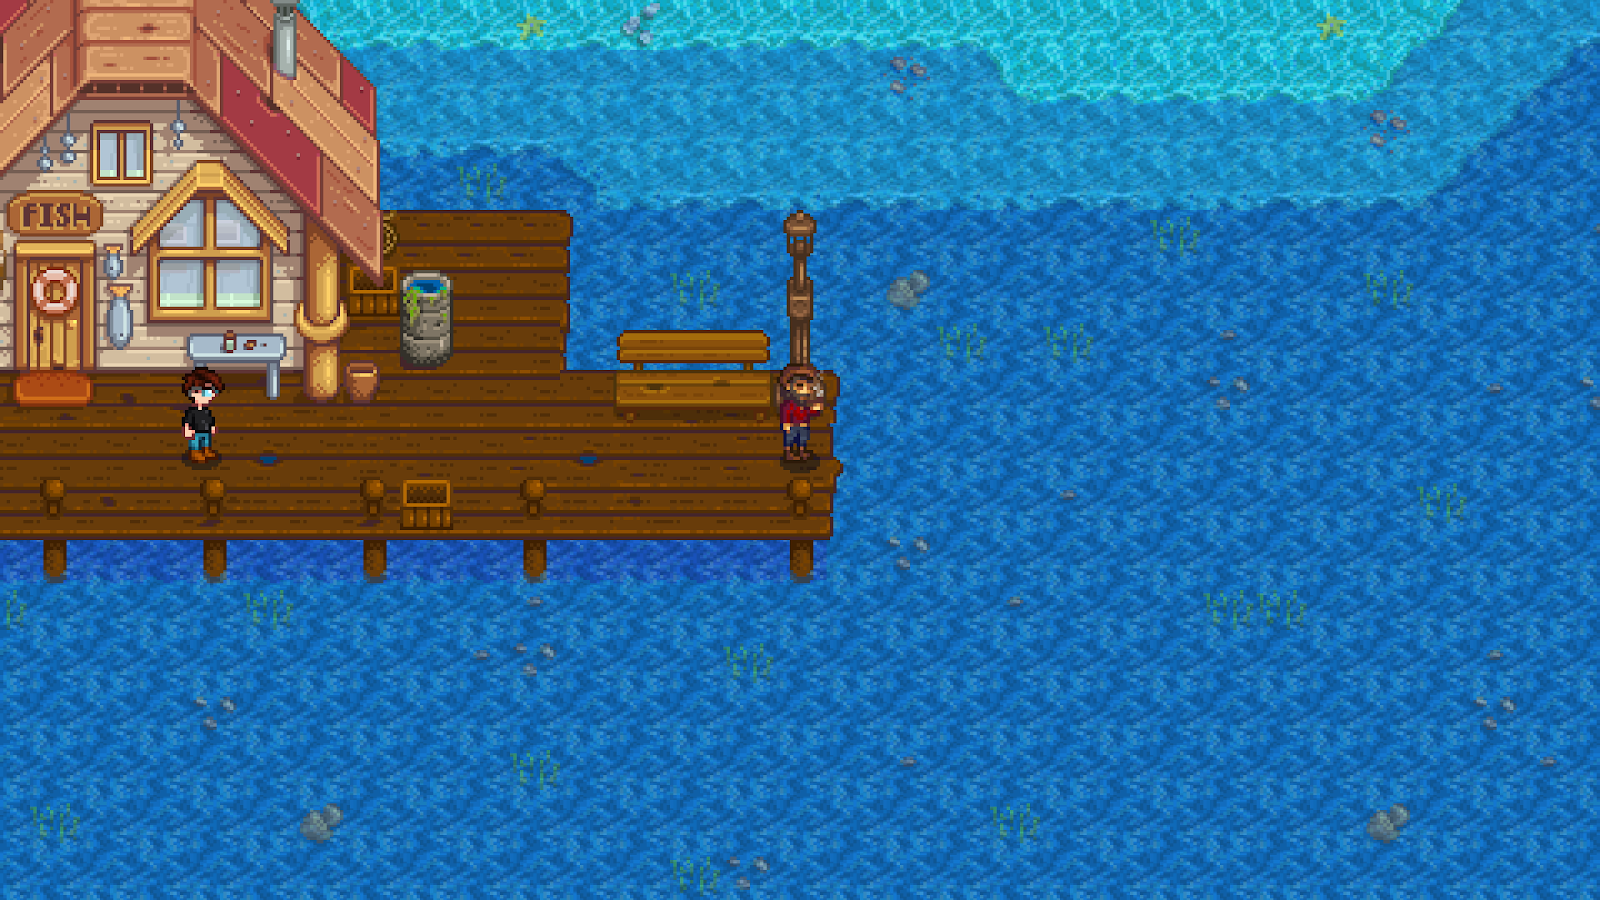 Stardew Valley Fishing Hub, all you need to know about fishing